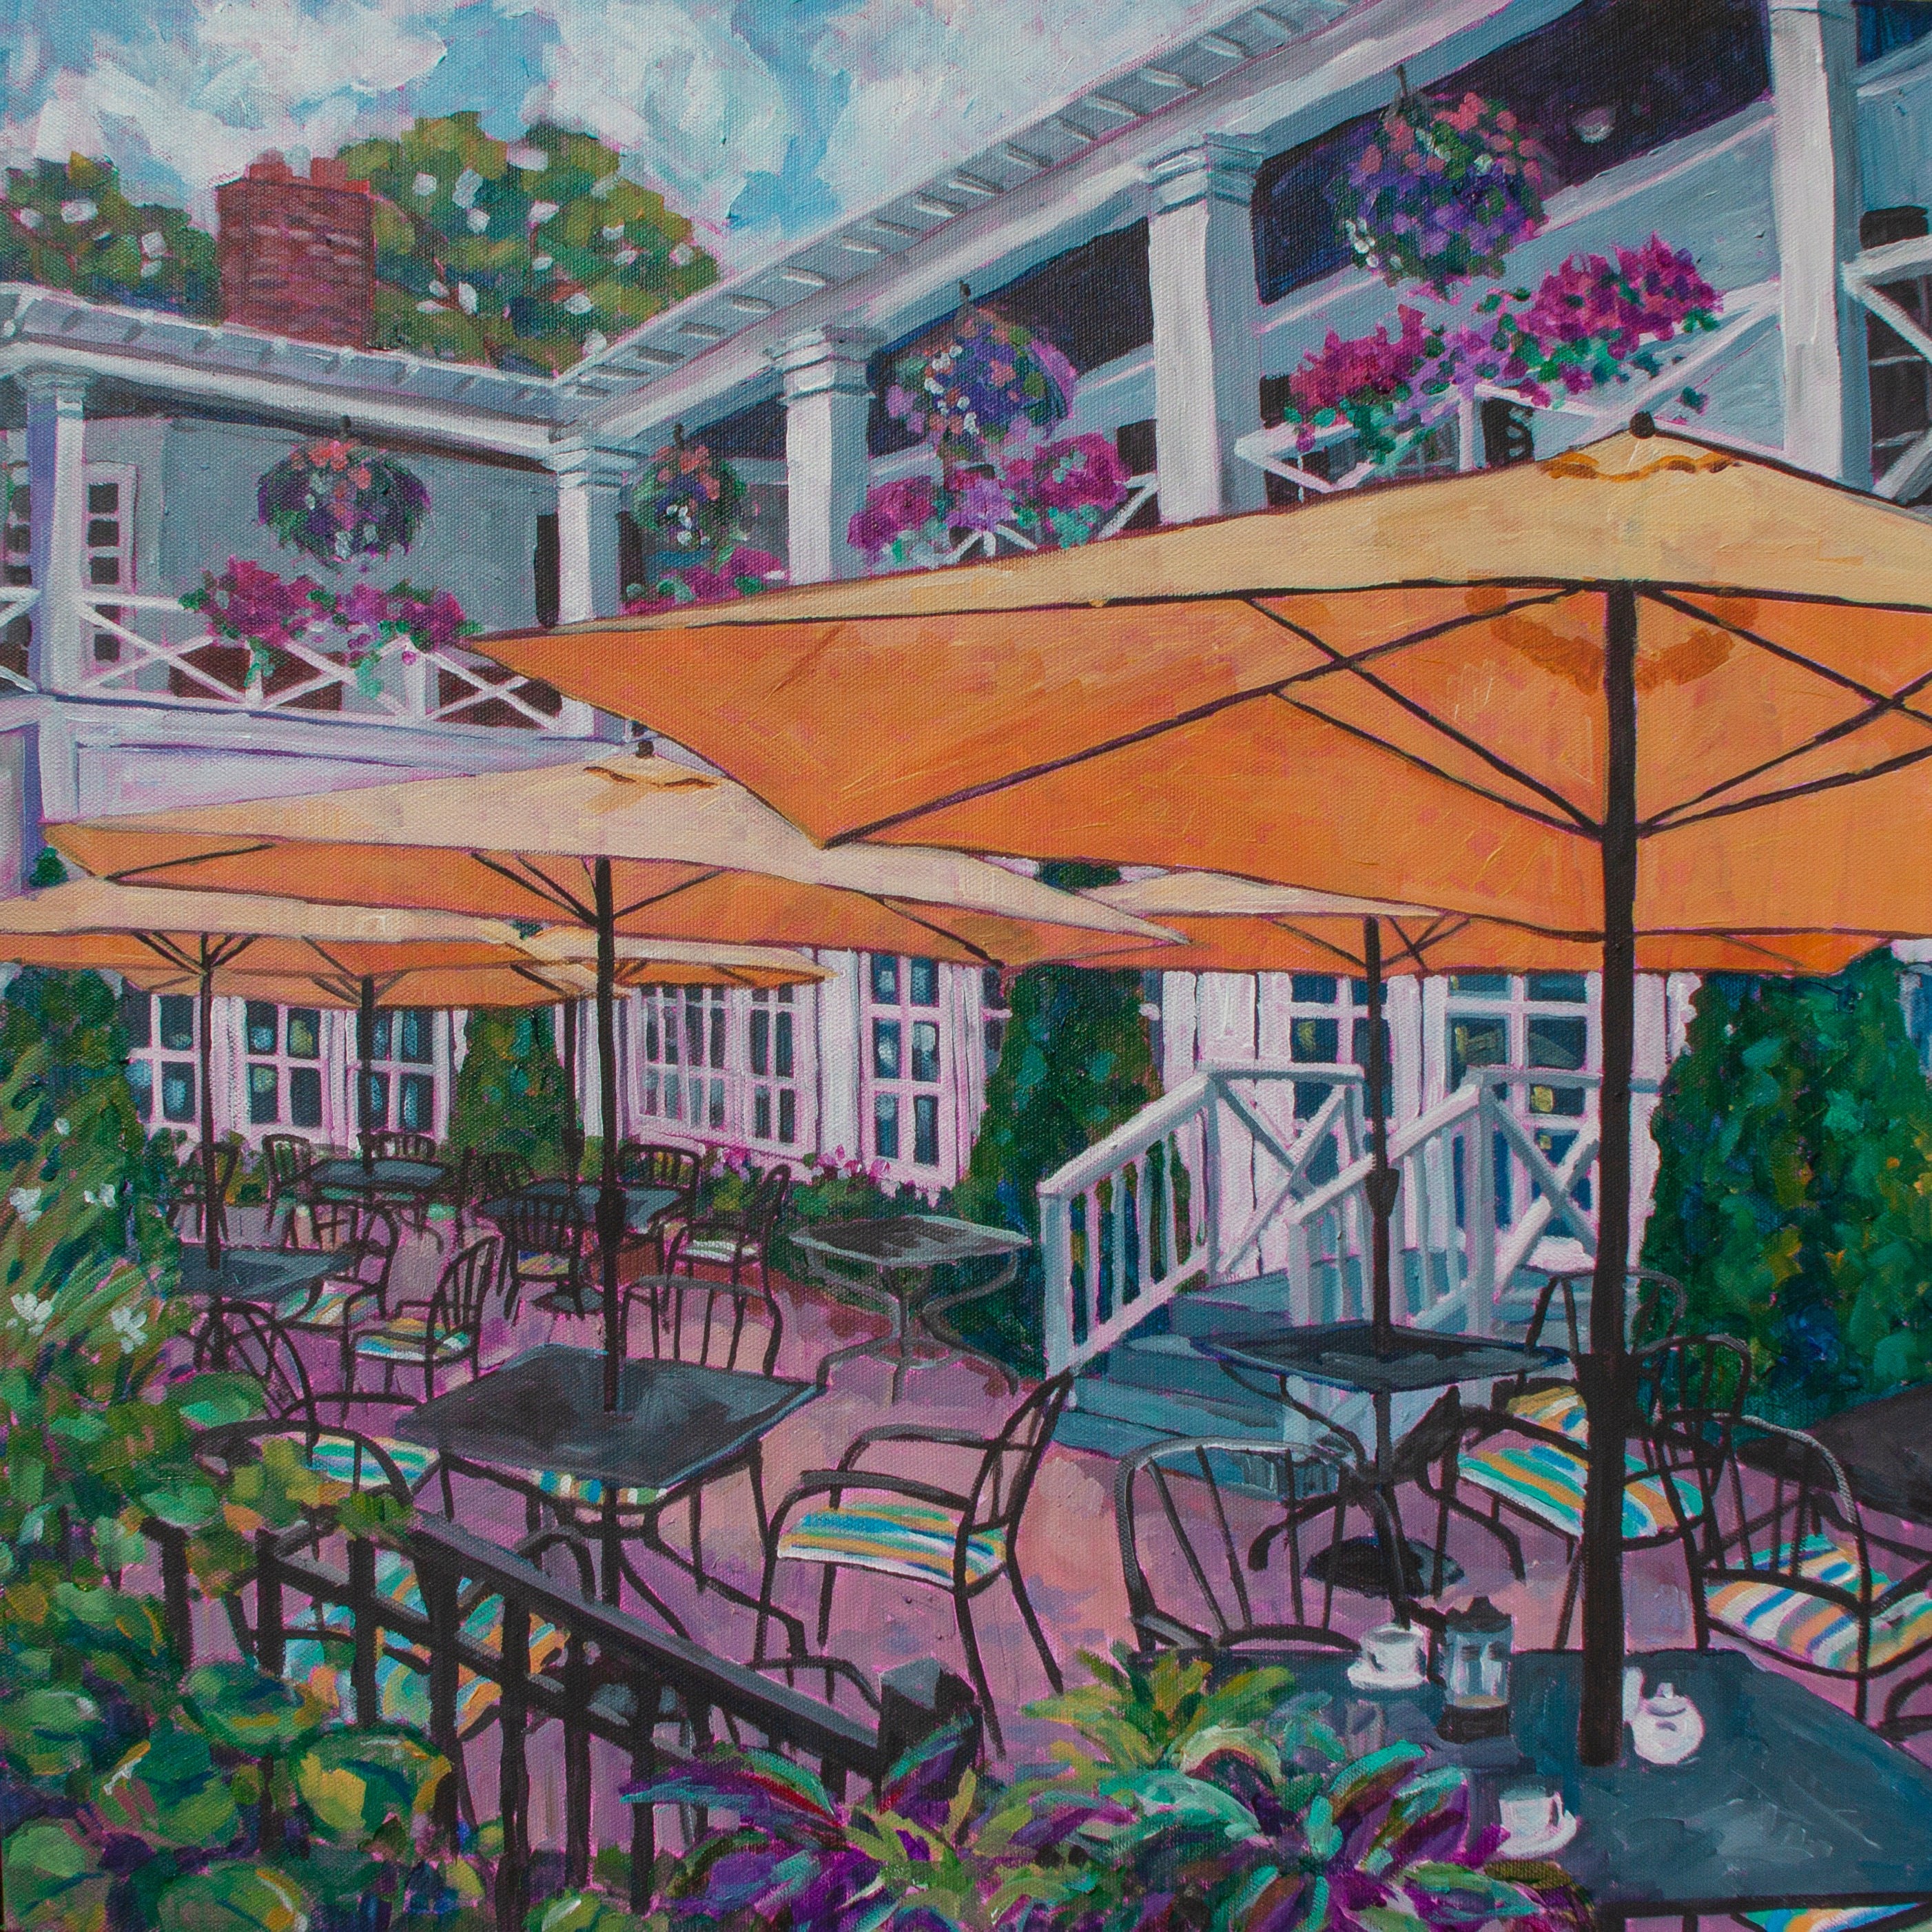 Cafe patio with tables, chairs, yellow umbrellas and flowers from Niagara on the Lake, Ontario Canada